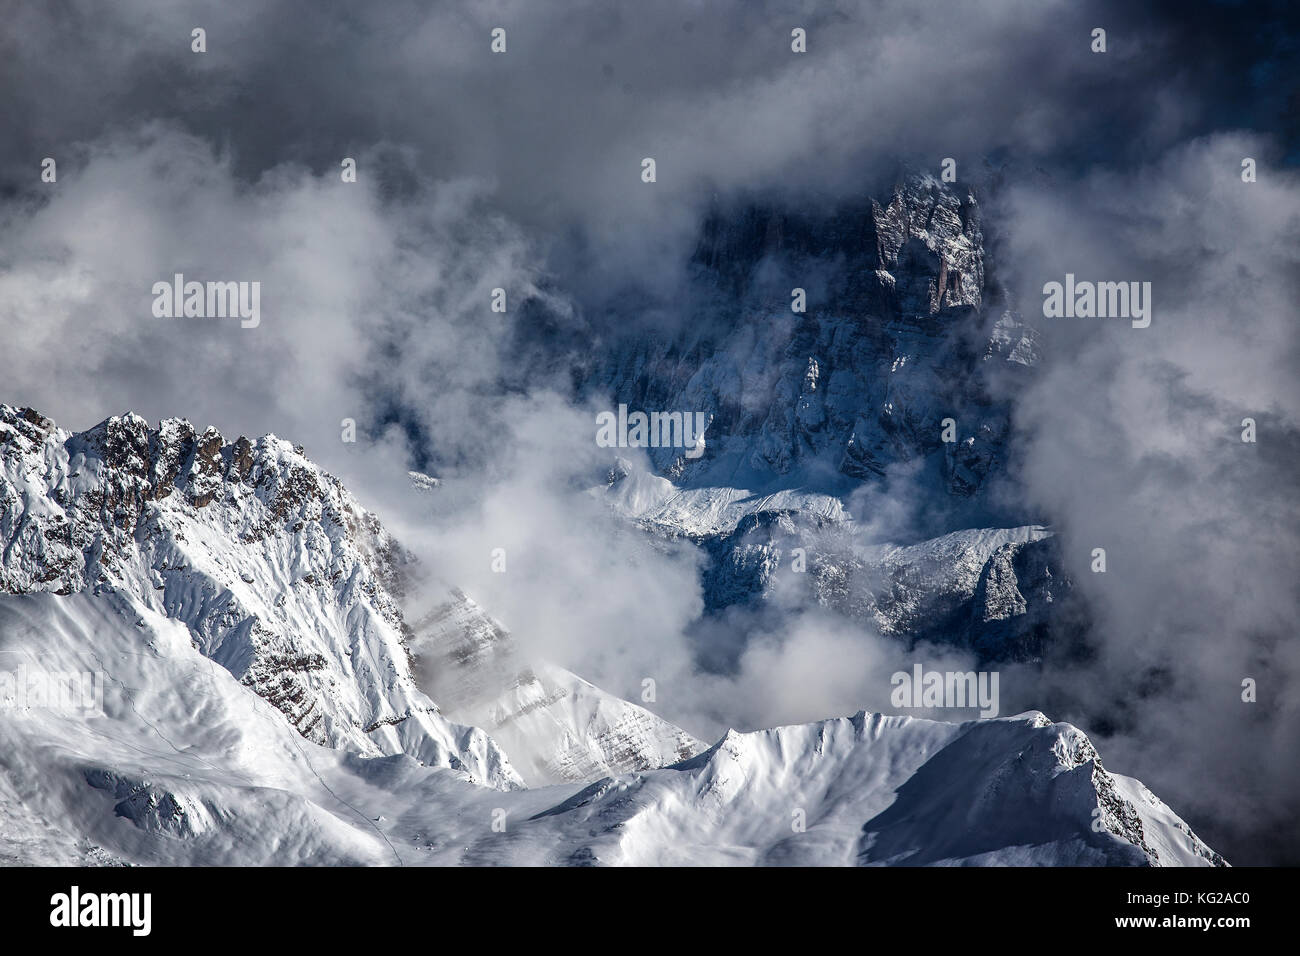 dramatic weather landscape in winter dolomites mountains Stock Photo